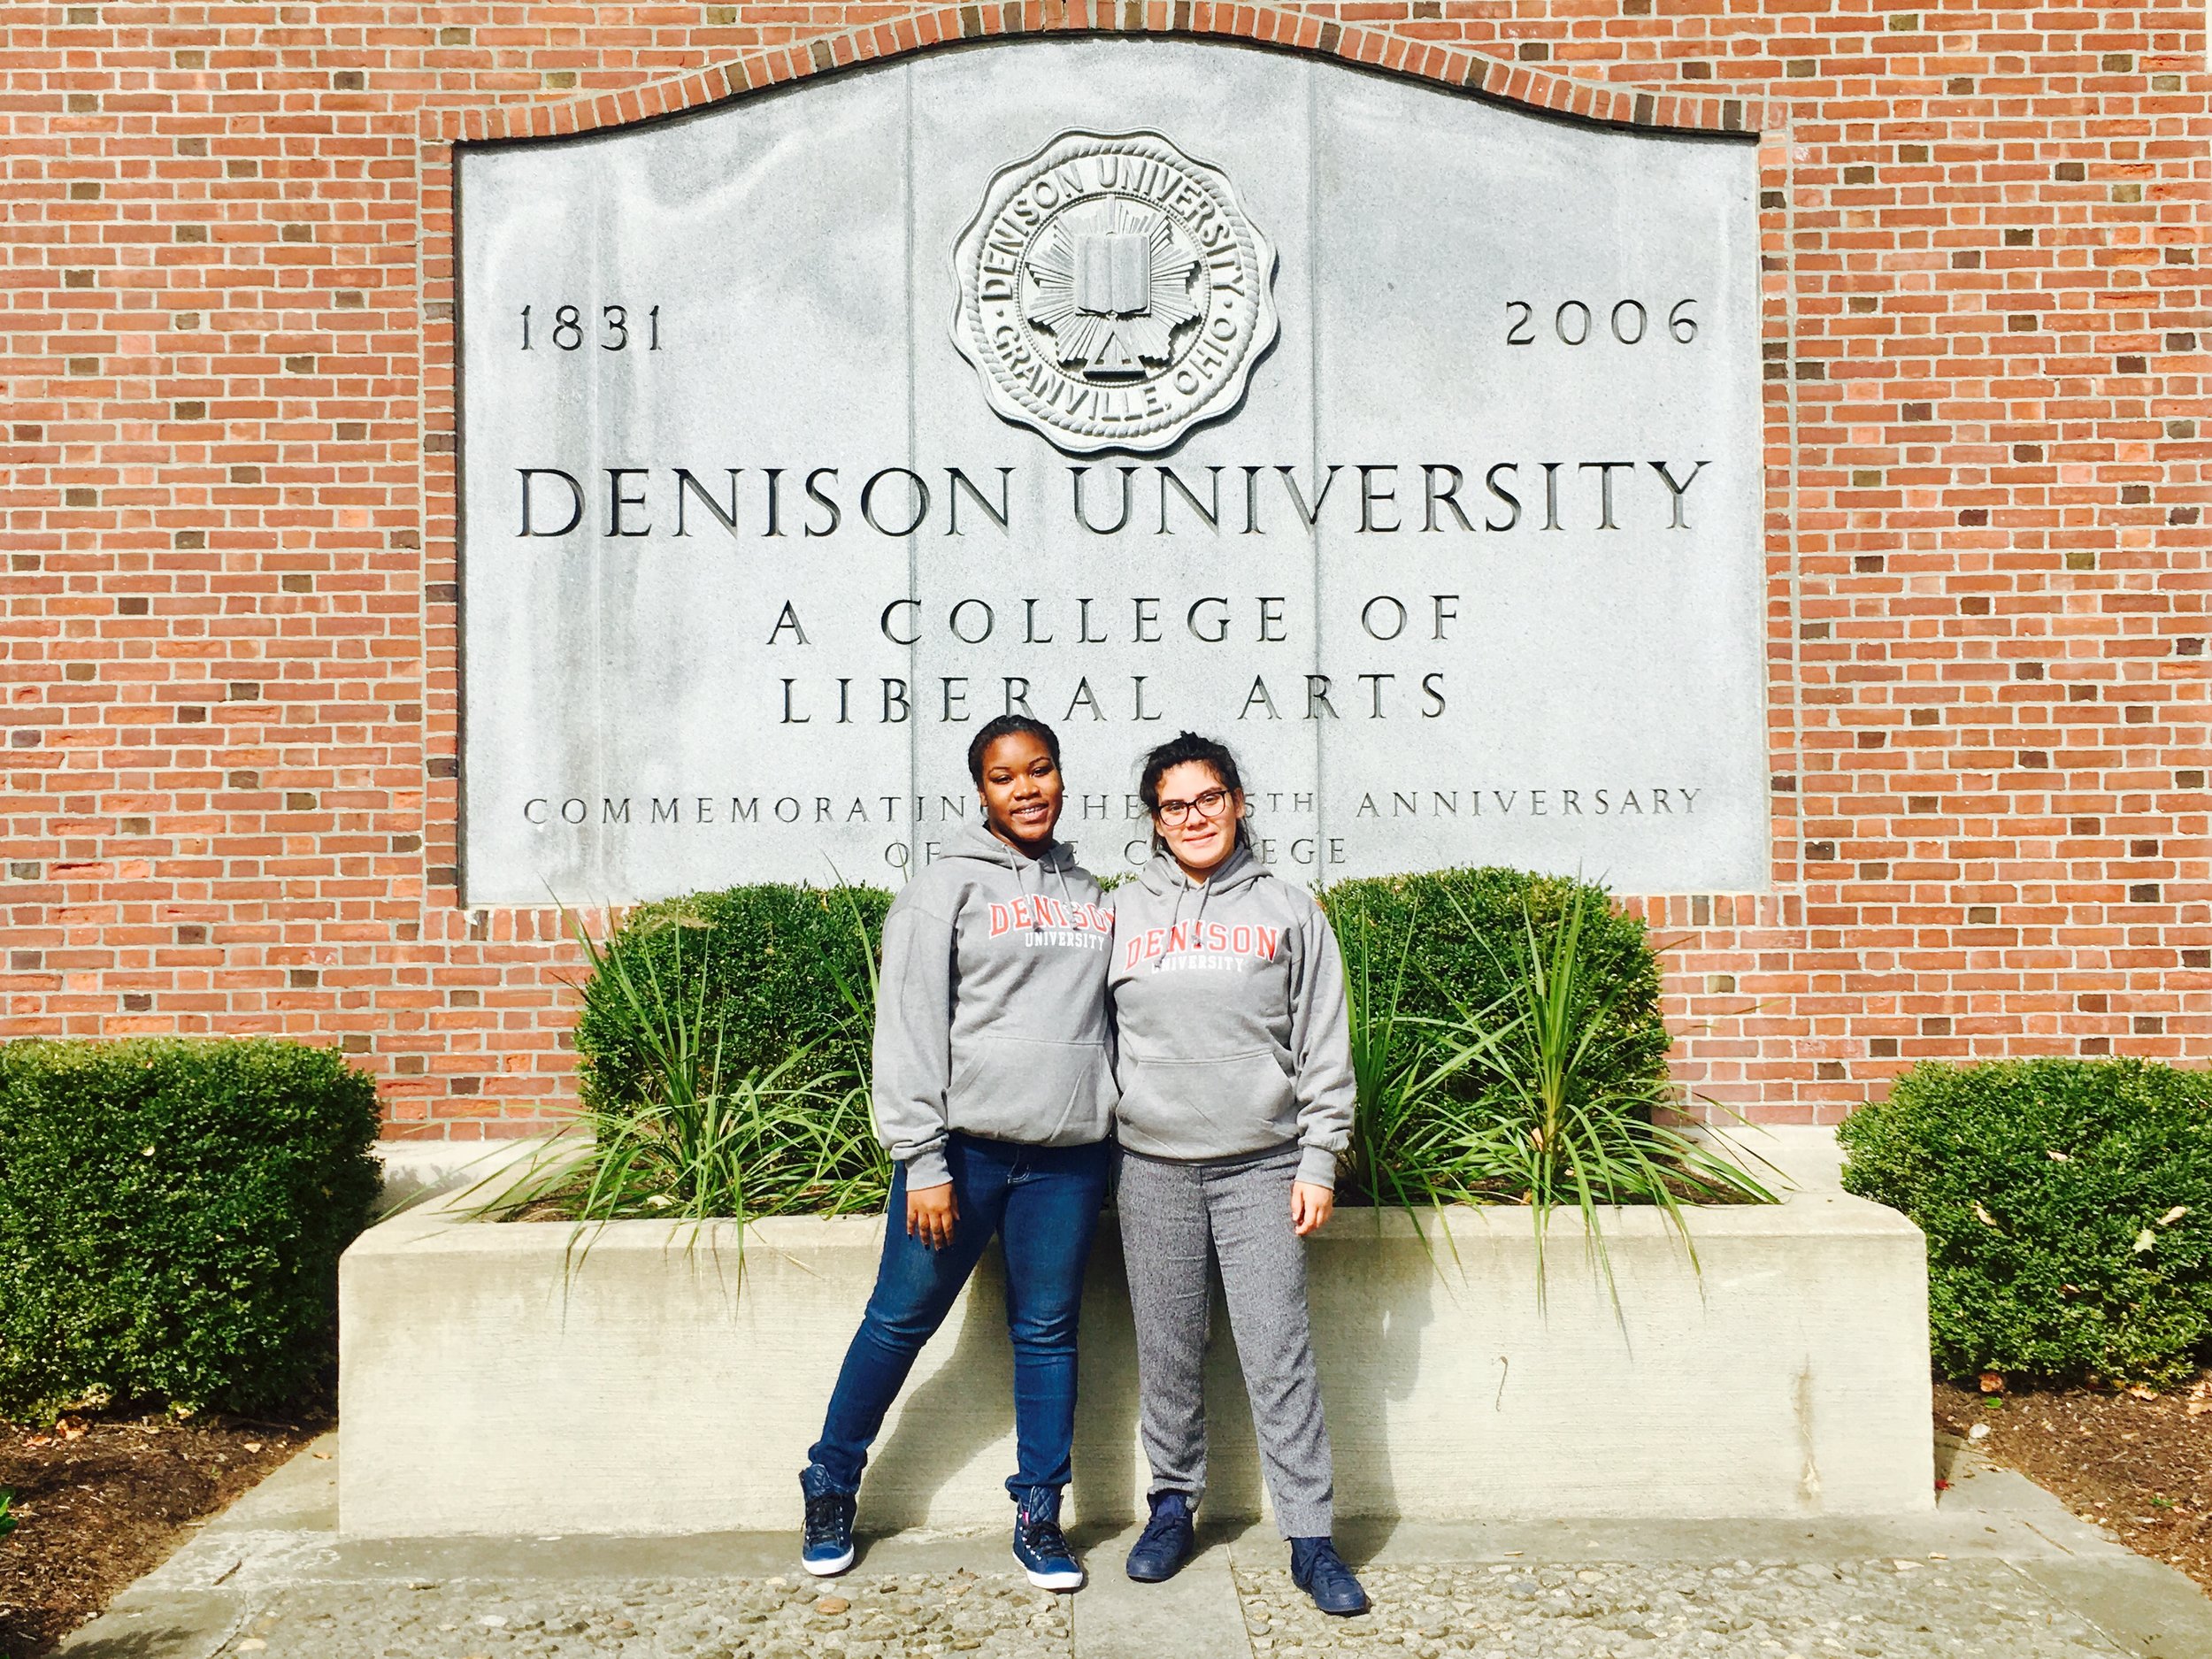 Darne'sha, left, and Litzi, right, in their new Denison hoodies in front of the campus gate!